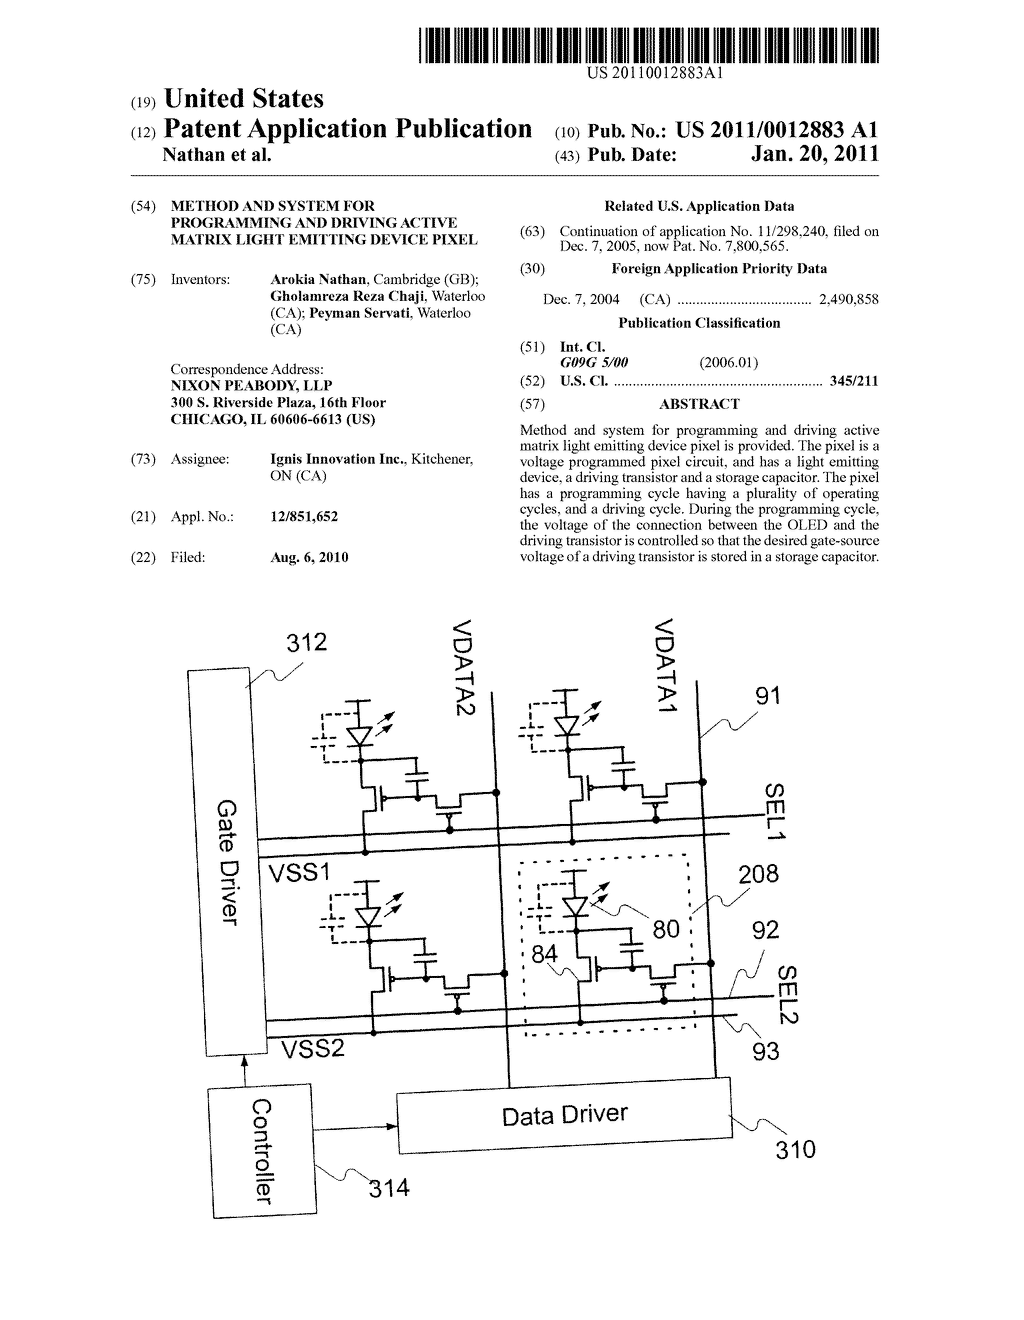 METHOD AND SYSTEM FOR PROGRAMMING AND DRIVING ACTIVE MATRIX LIGHT EMITTING DEVICE PIXEL - diagram, schematic, and image 01